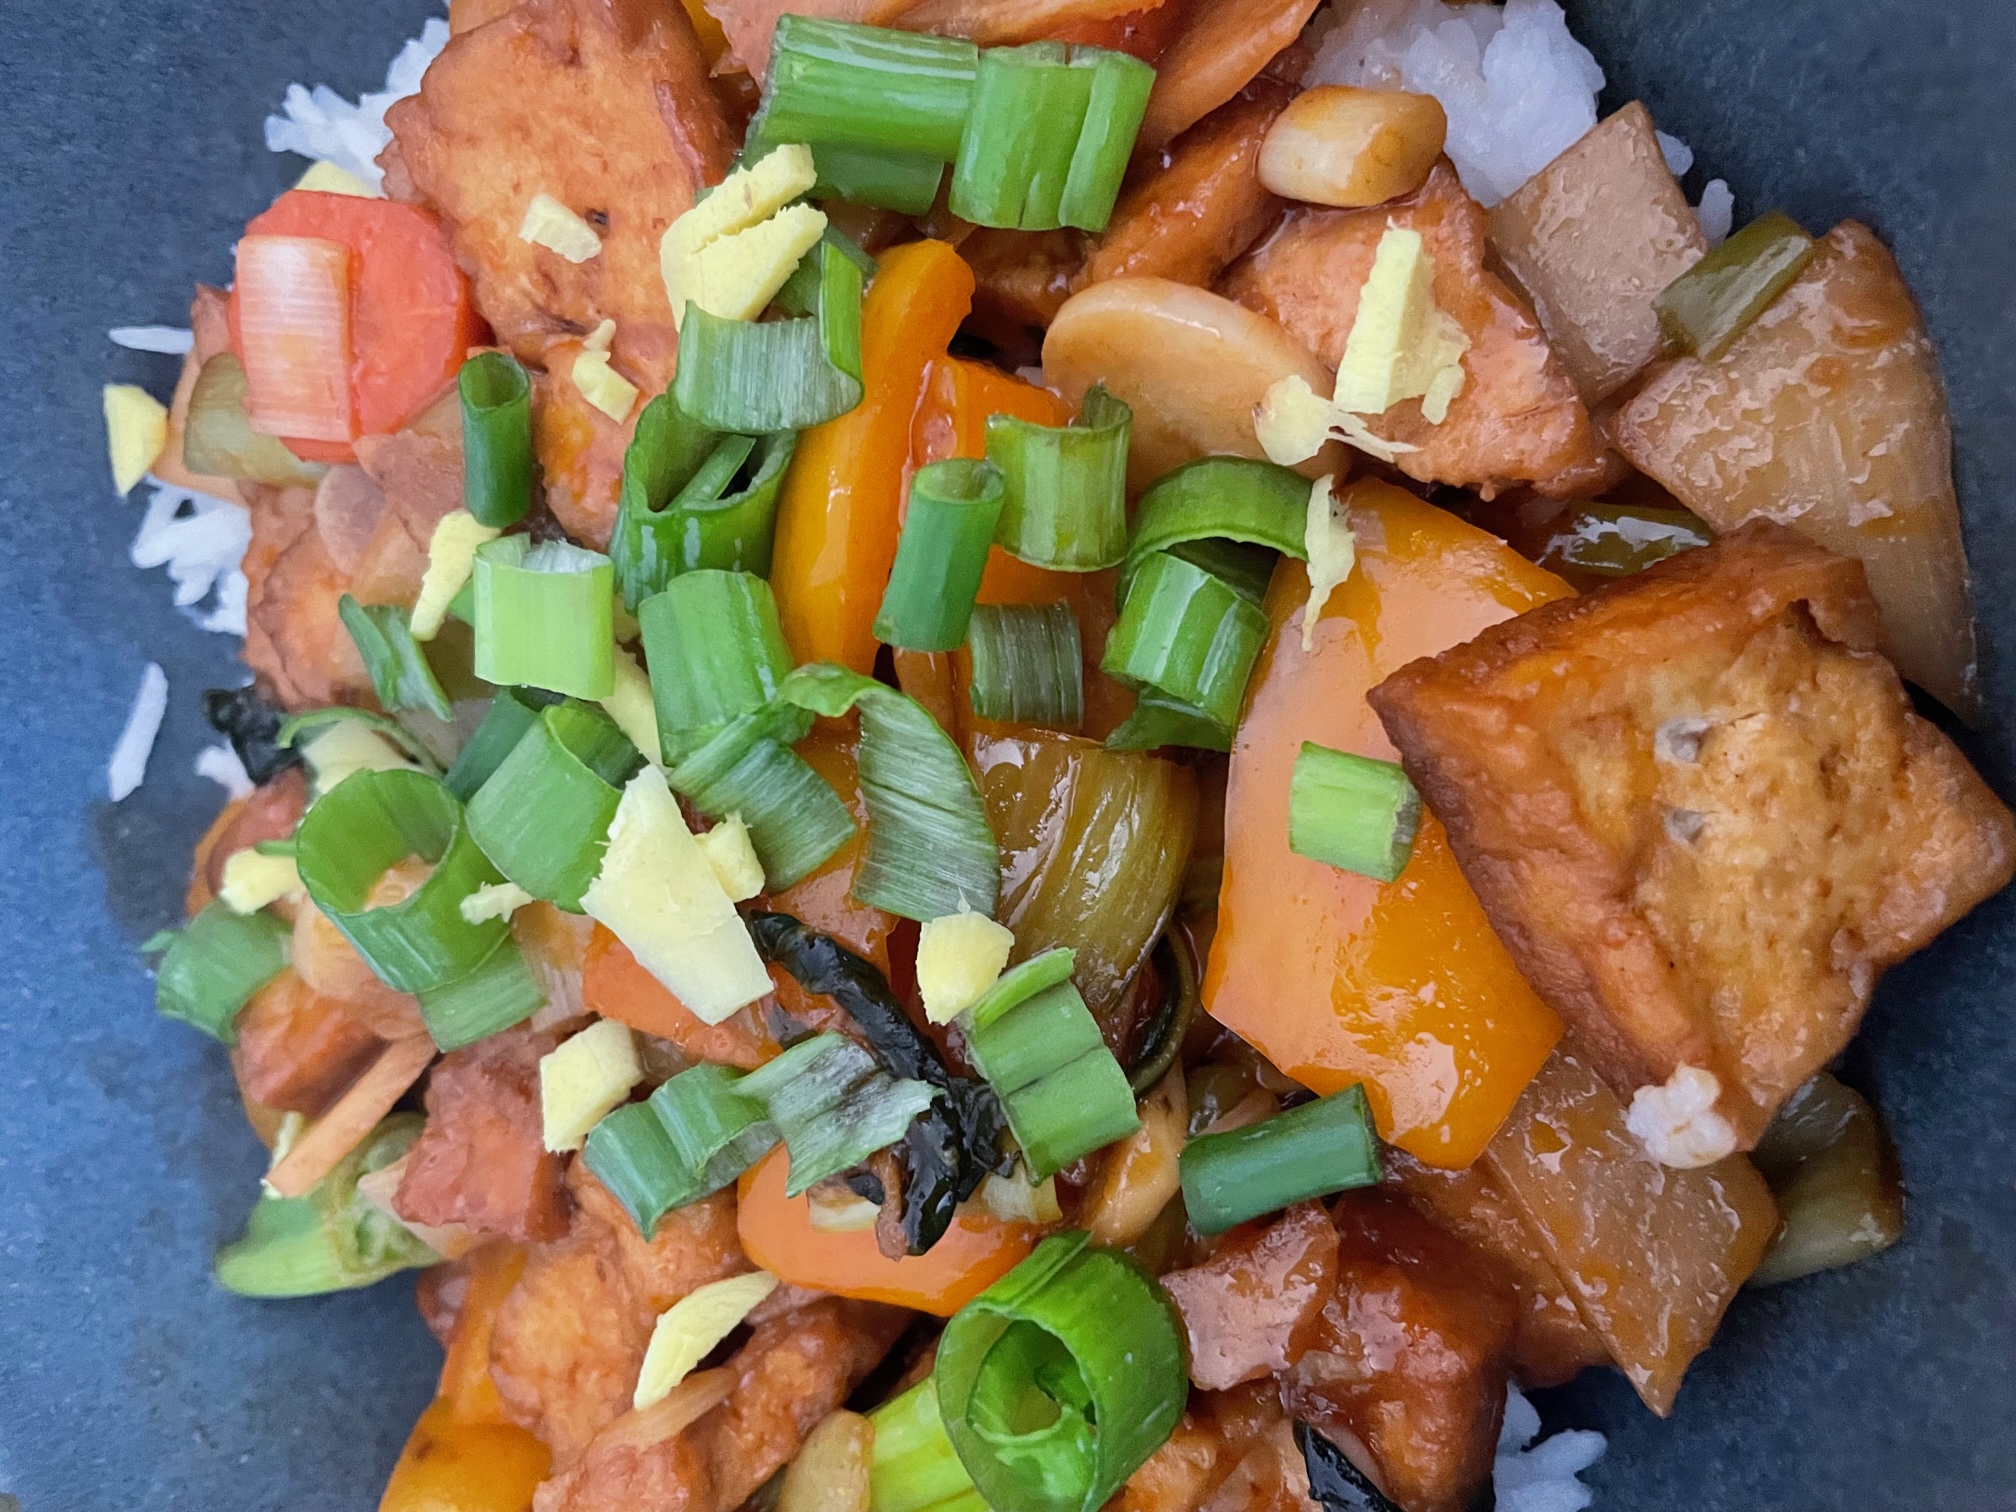 a delicious-looking tofu dish with stir-fried vegetables and a lovely spicy sauce (all vegan, contact me if you want the recipe)